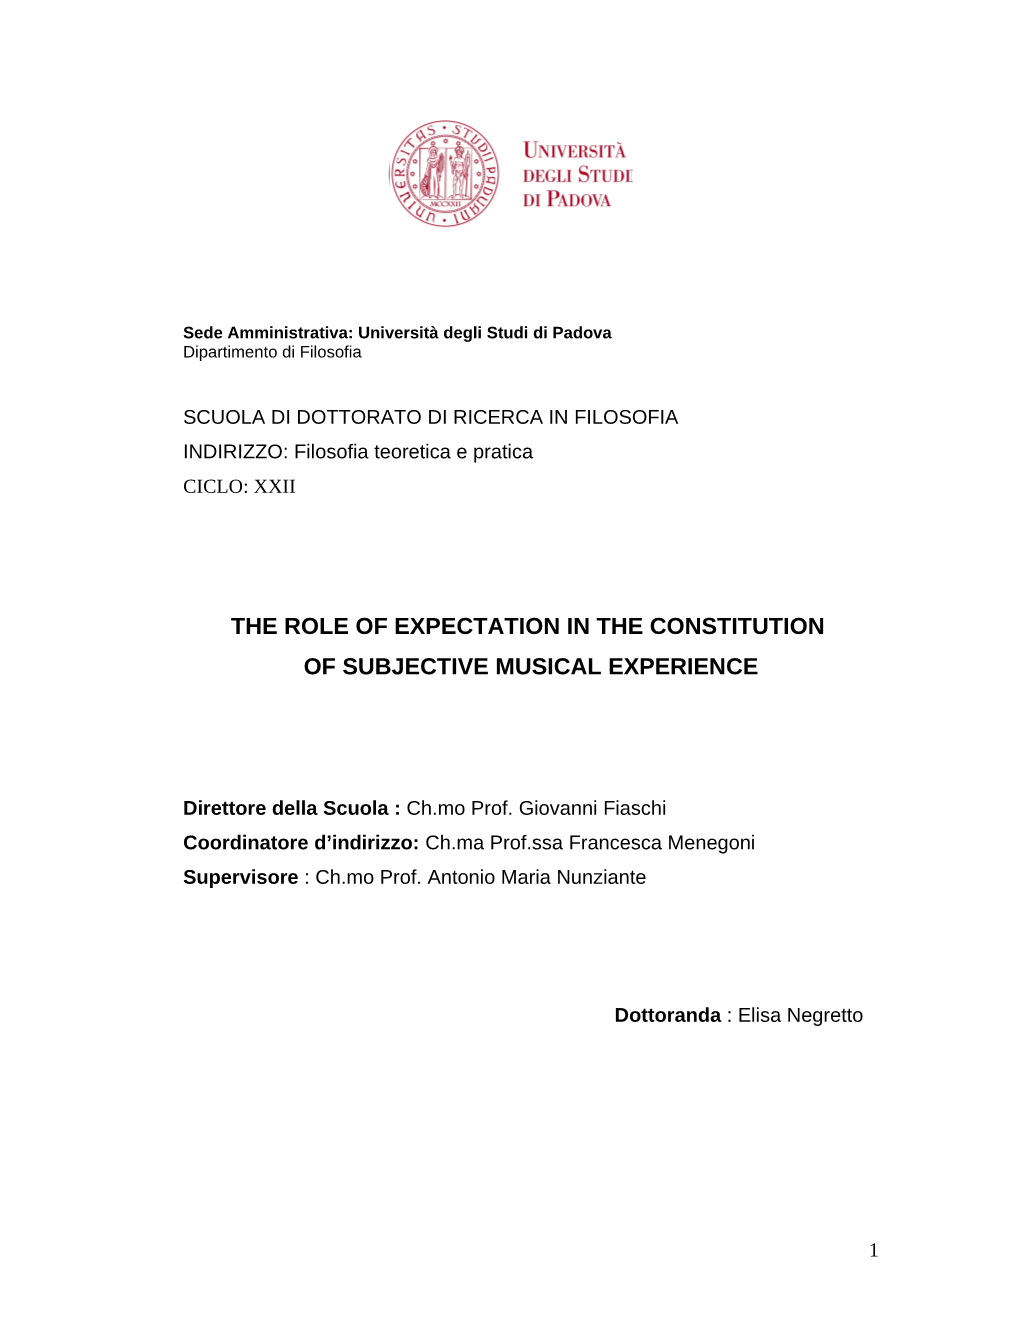 The Role of Expectation in the Constitution of Subjective Musical Experience